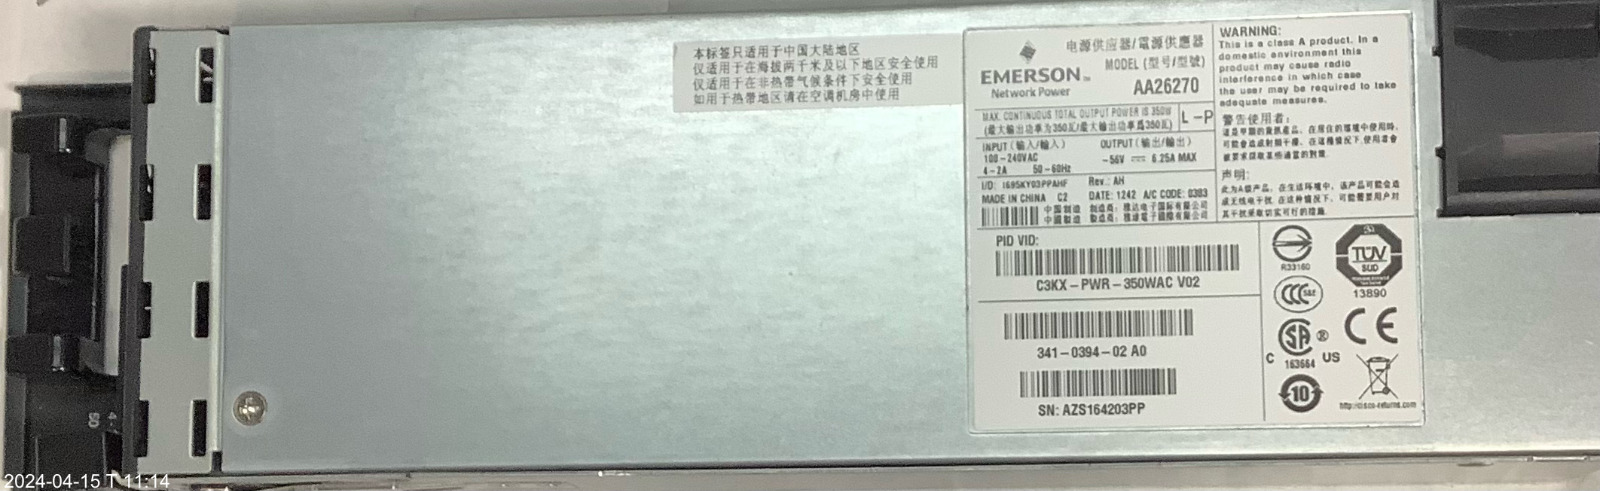 EMERSON NETWORK POWER AA26270 power supply